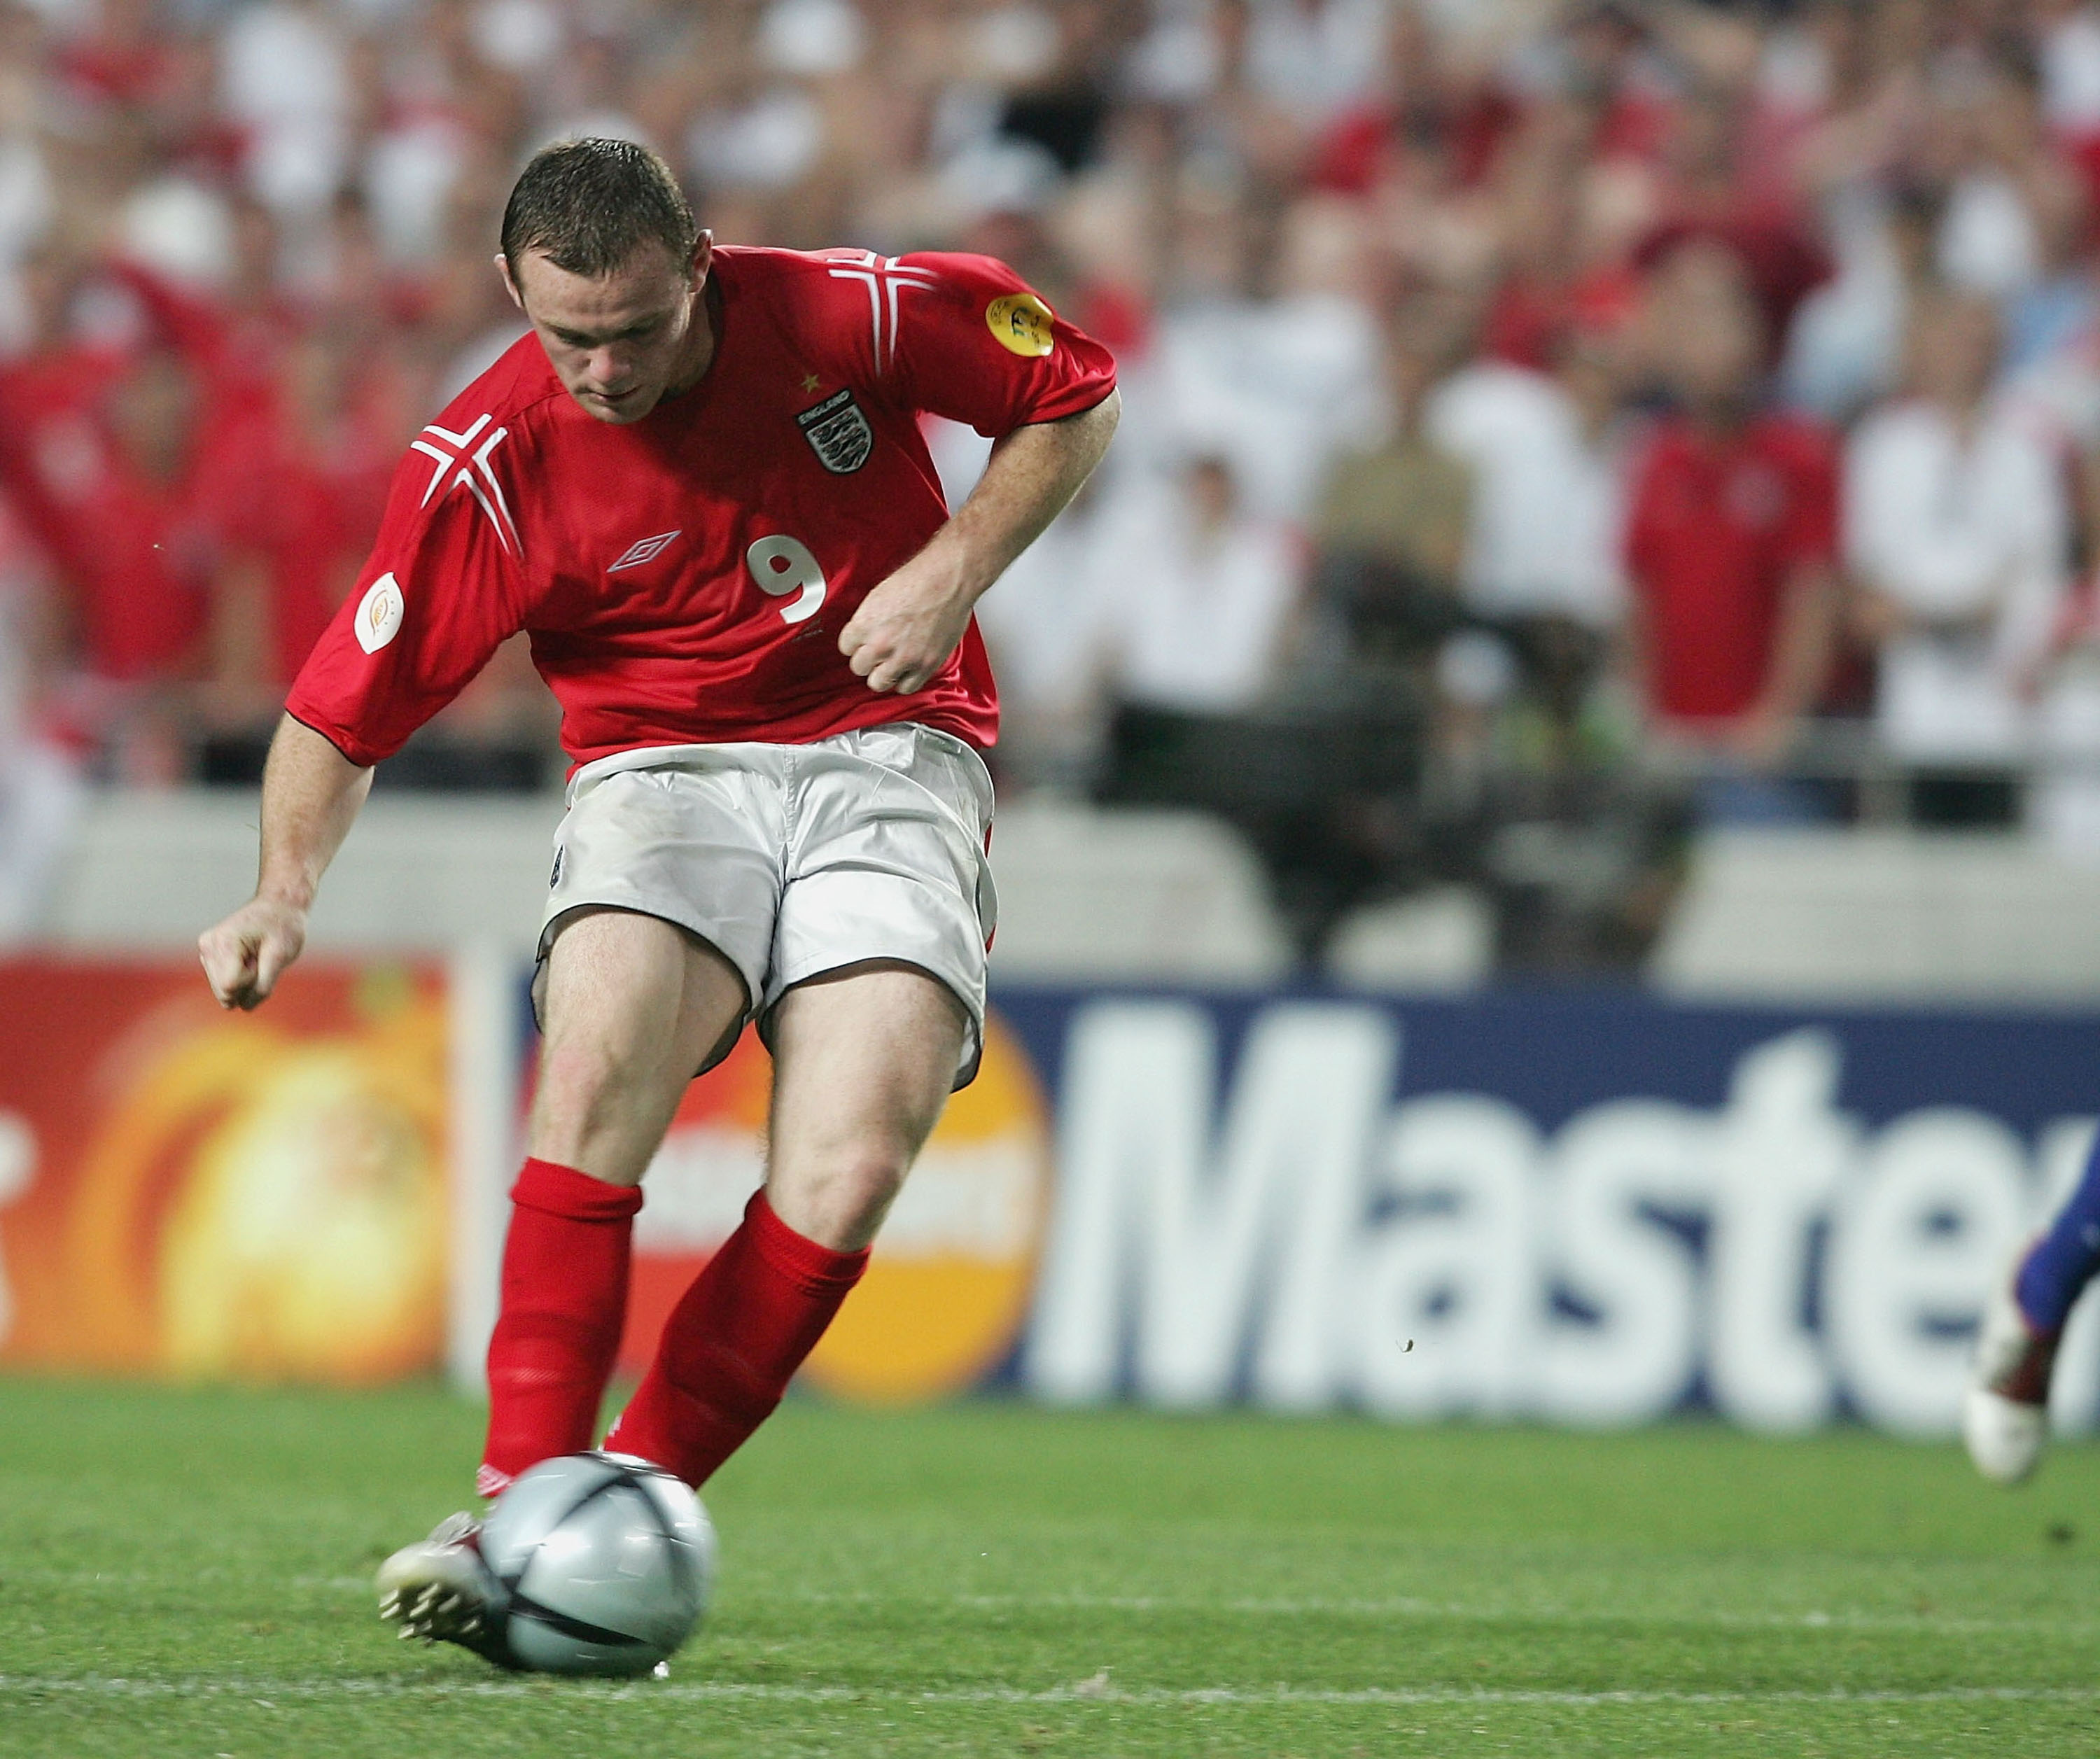 LISBON, PORTUGAL - JUNE 21: Wayne Rooney of England scores the third goal during the UEFA Euro 2004, Group B match between Croatia and England at the Luz Stadium on June 21, 2004 in Lisbon, Portugal. (Photo by Ross Kinnaird/Getty Images)